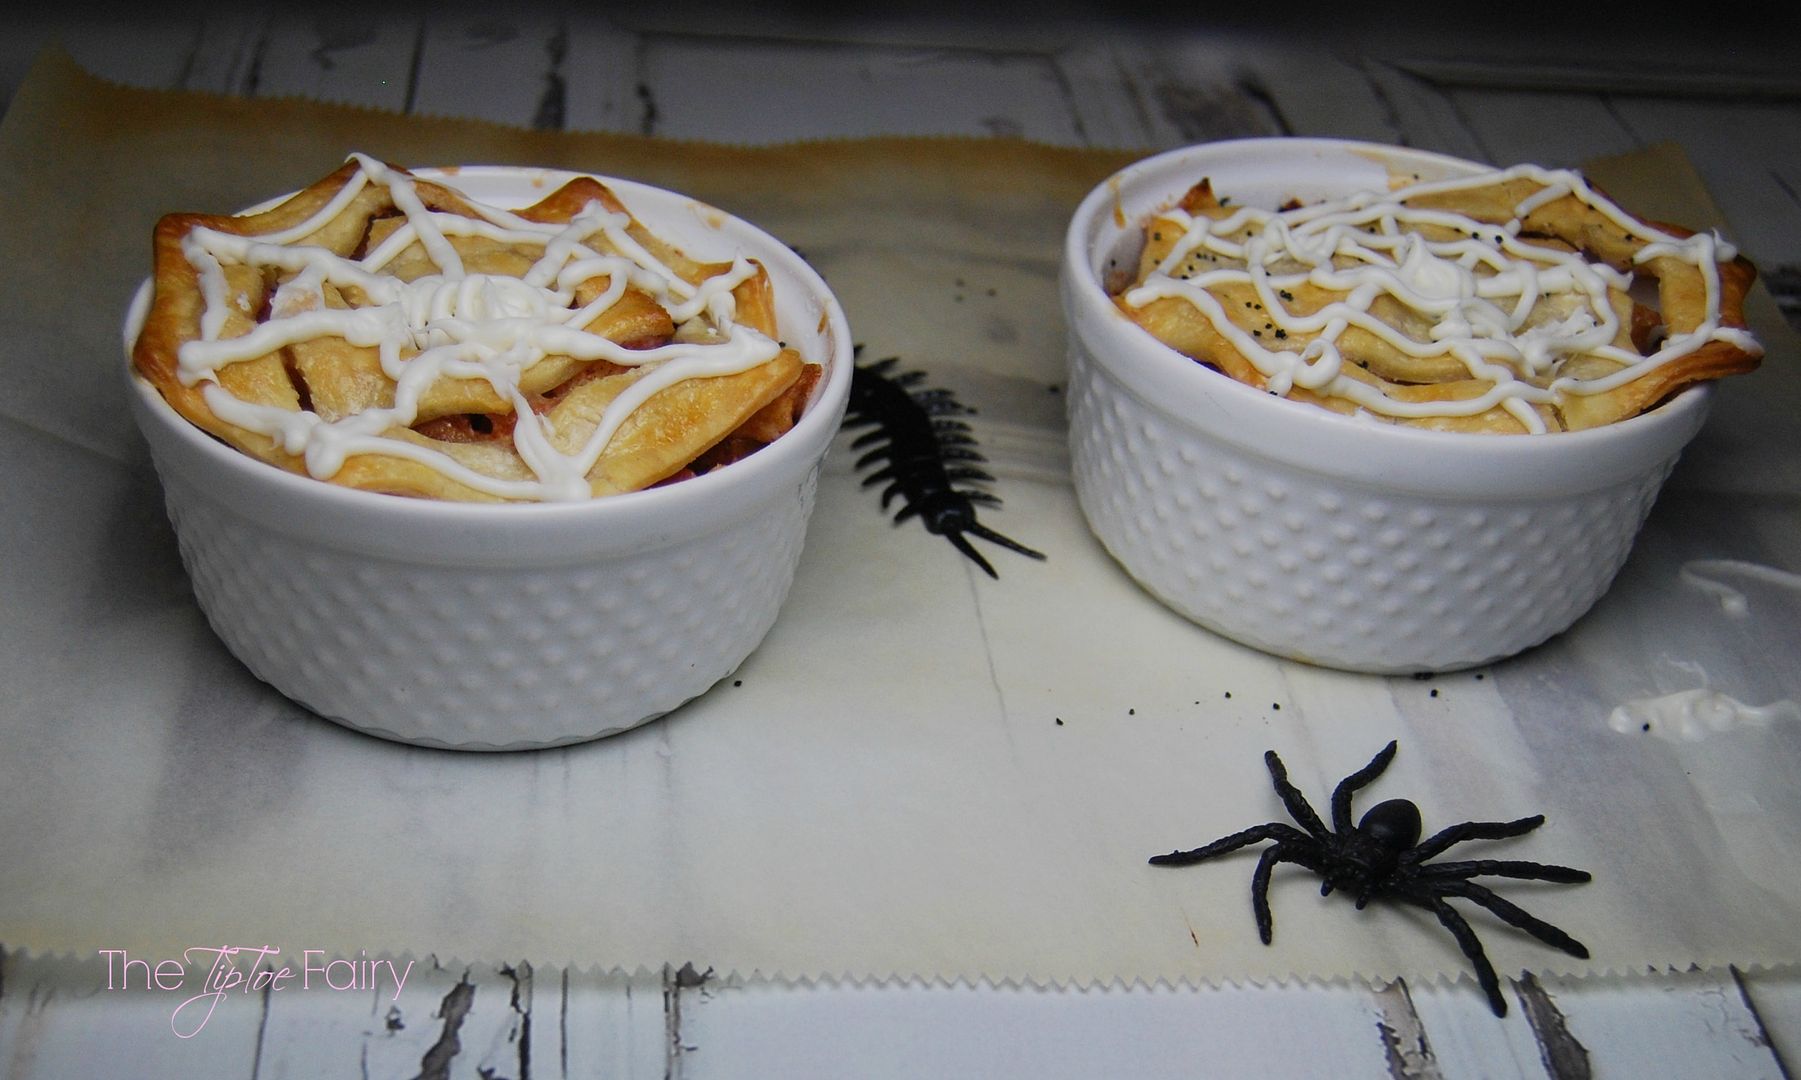 Make Spider Web Mini Peach Cobblers with spider web cookie cutters | The TipToeFairy #halloweentreats #halloweenrecipes #peachrecipes #peachcobbler